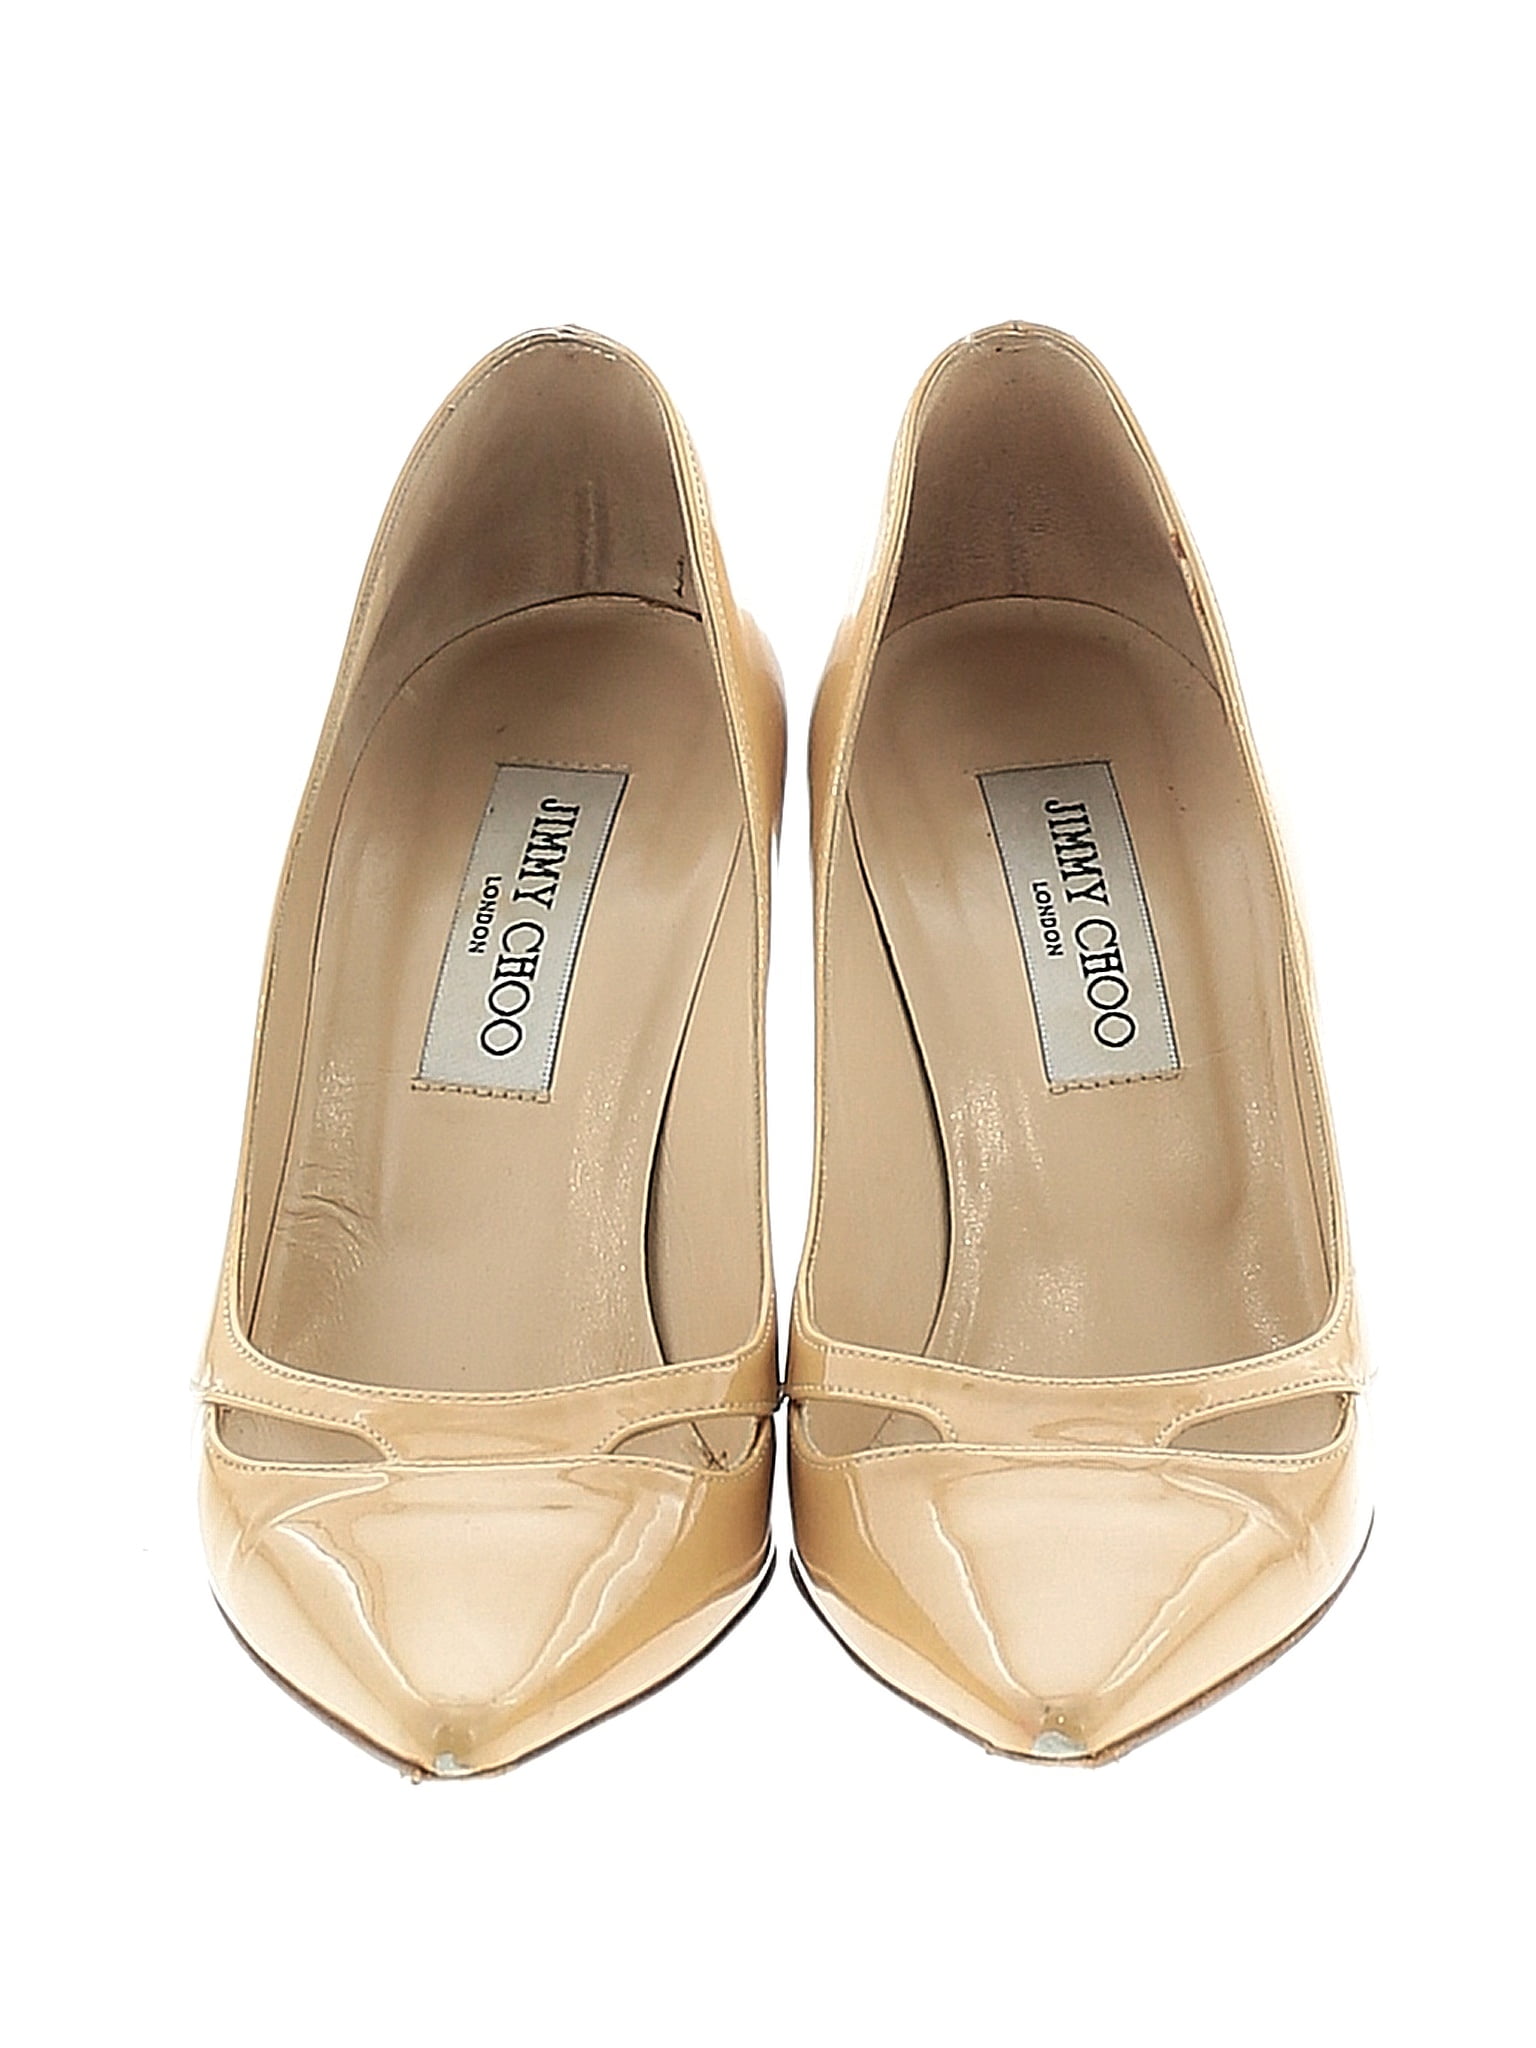 Jimmy Choo 100% Patent Leather Solid Tan Ivory Heels Size 38 (EU) - 75% off